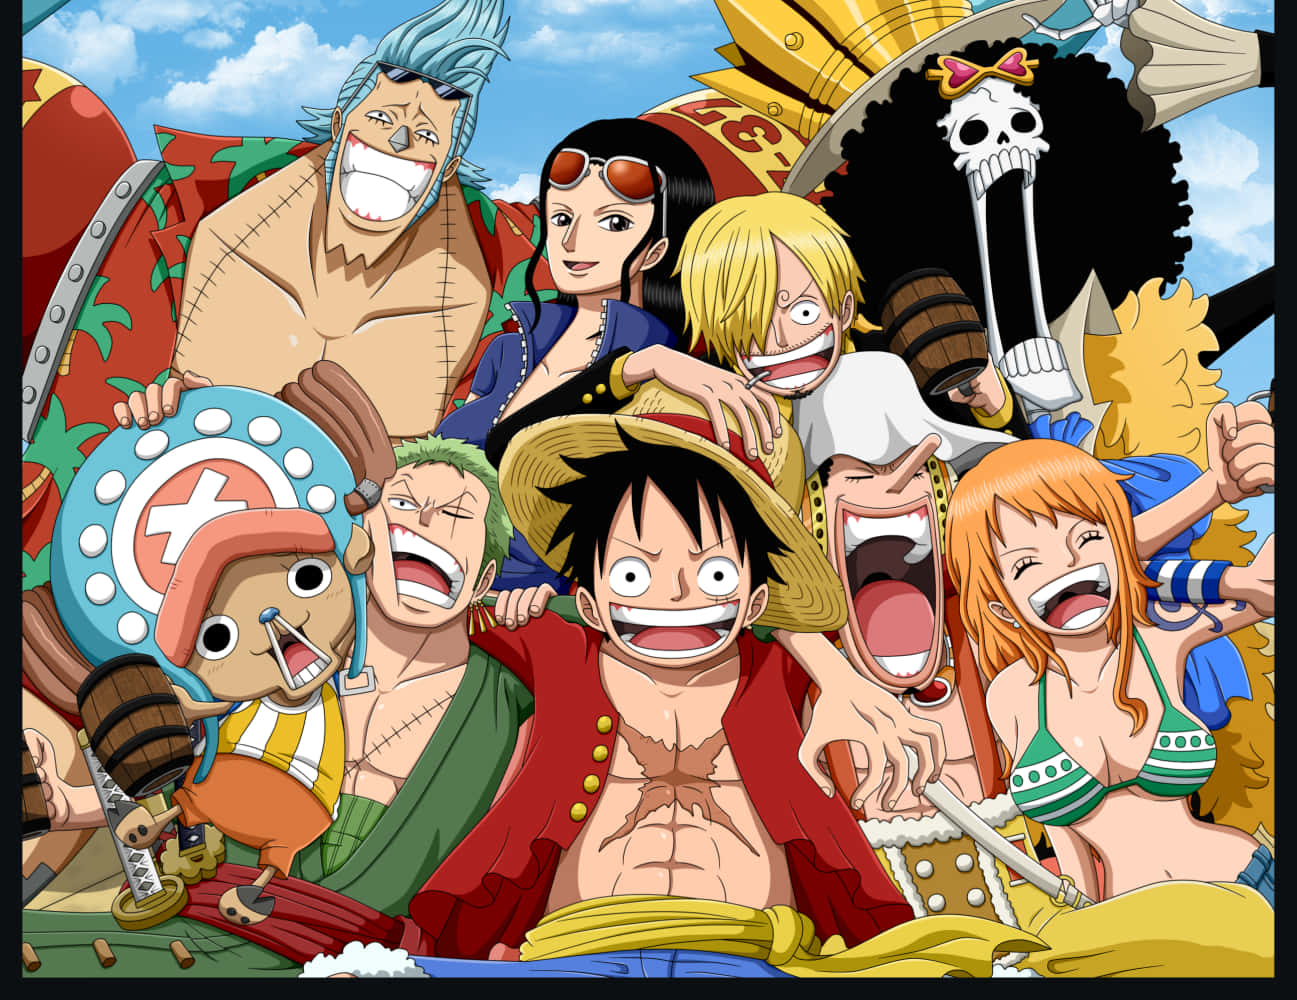 The Straw Hat Pirates – Setting Off On Their Next Adventure Wallpaper